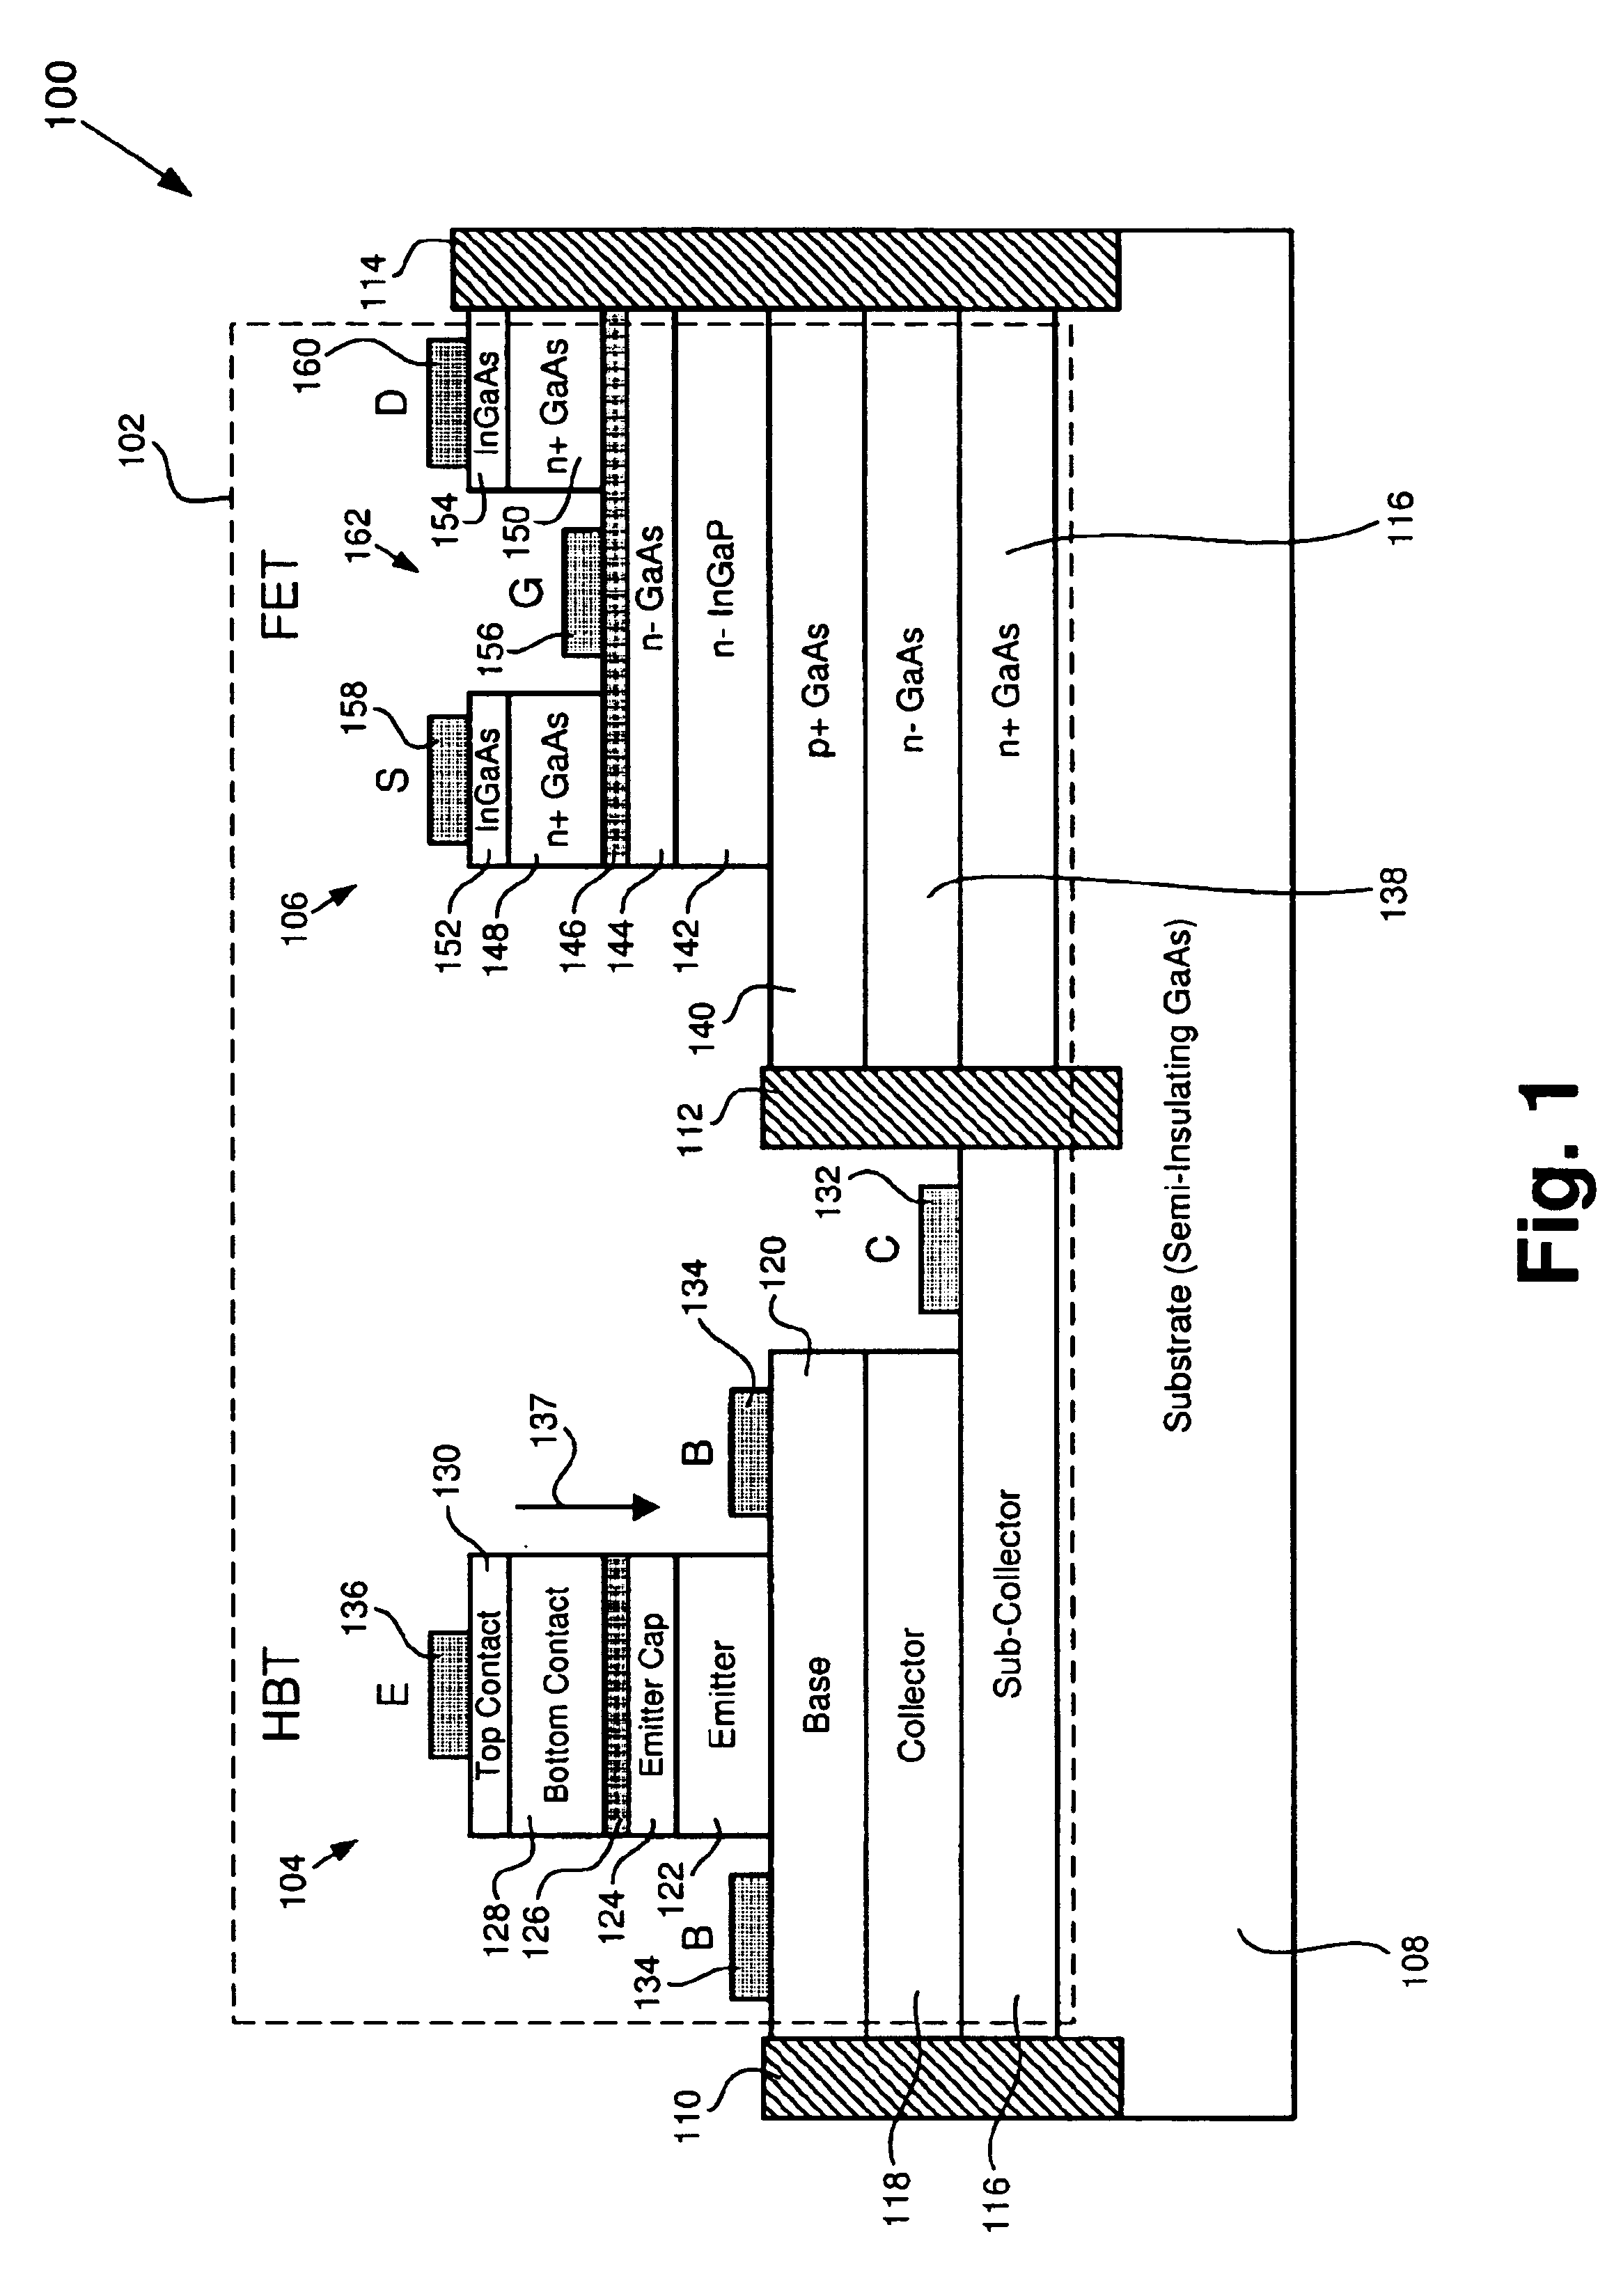 BiFET including a FET having increased linearity and manufacturability